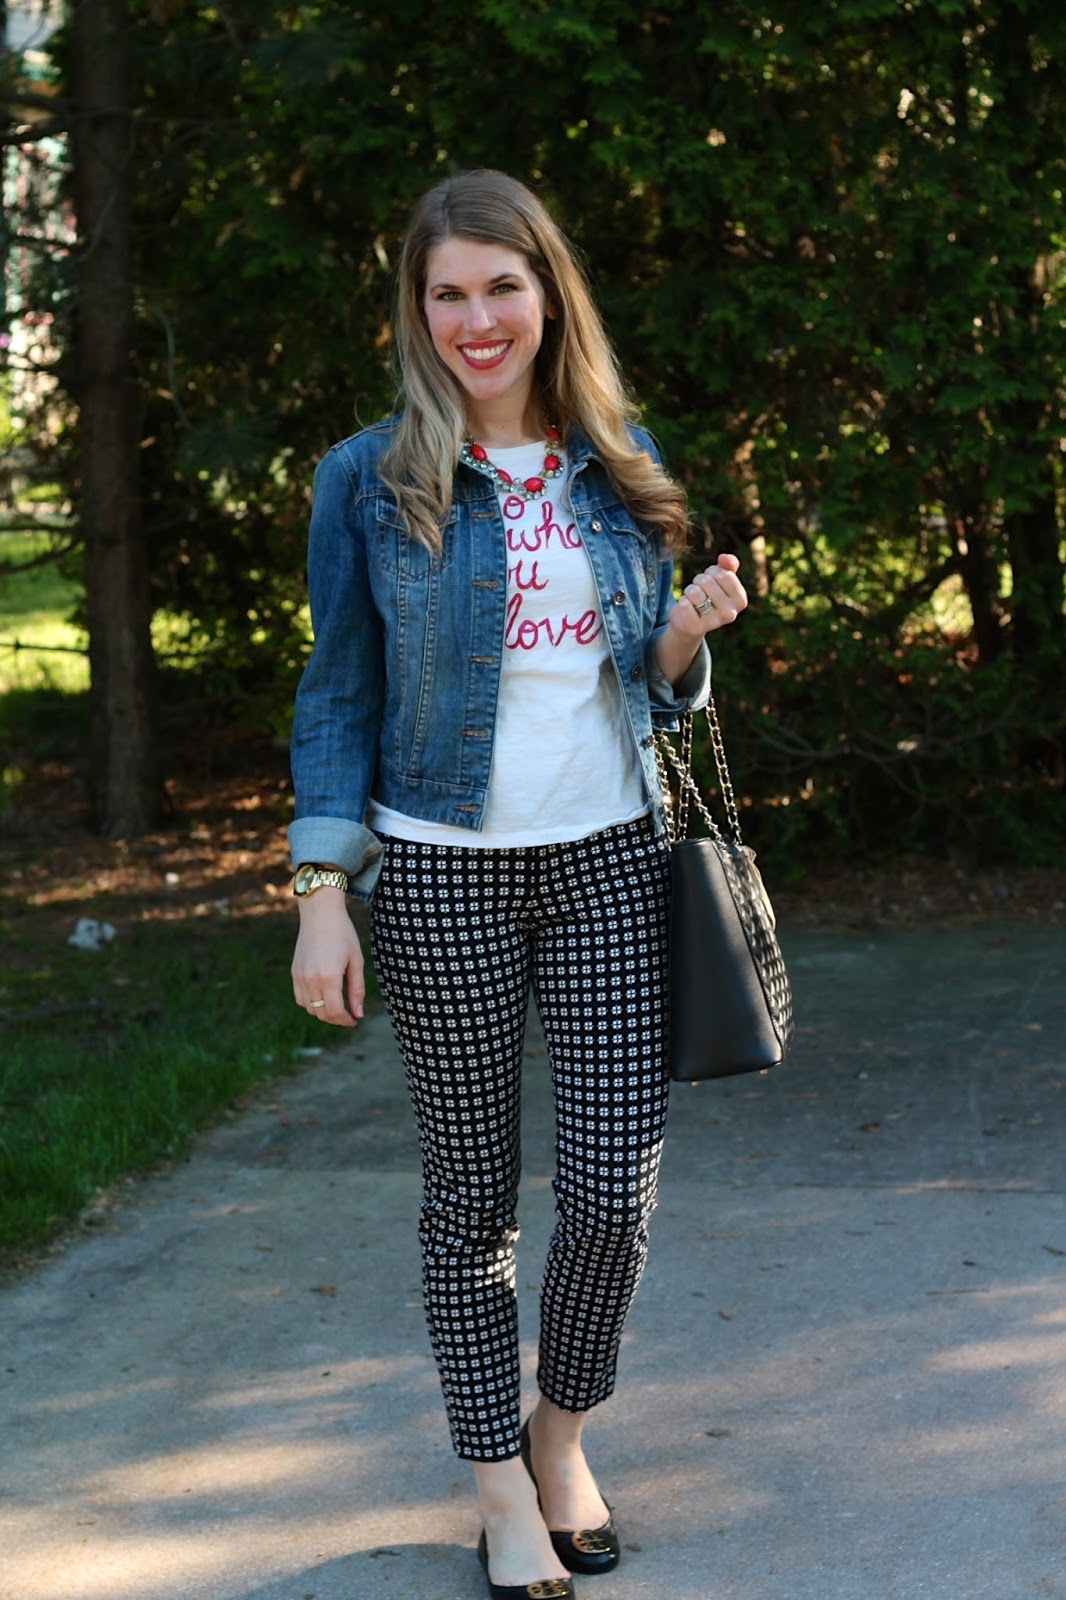 I do deClaire: Graphic Tee and Pixie Pants